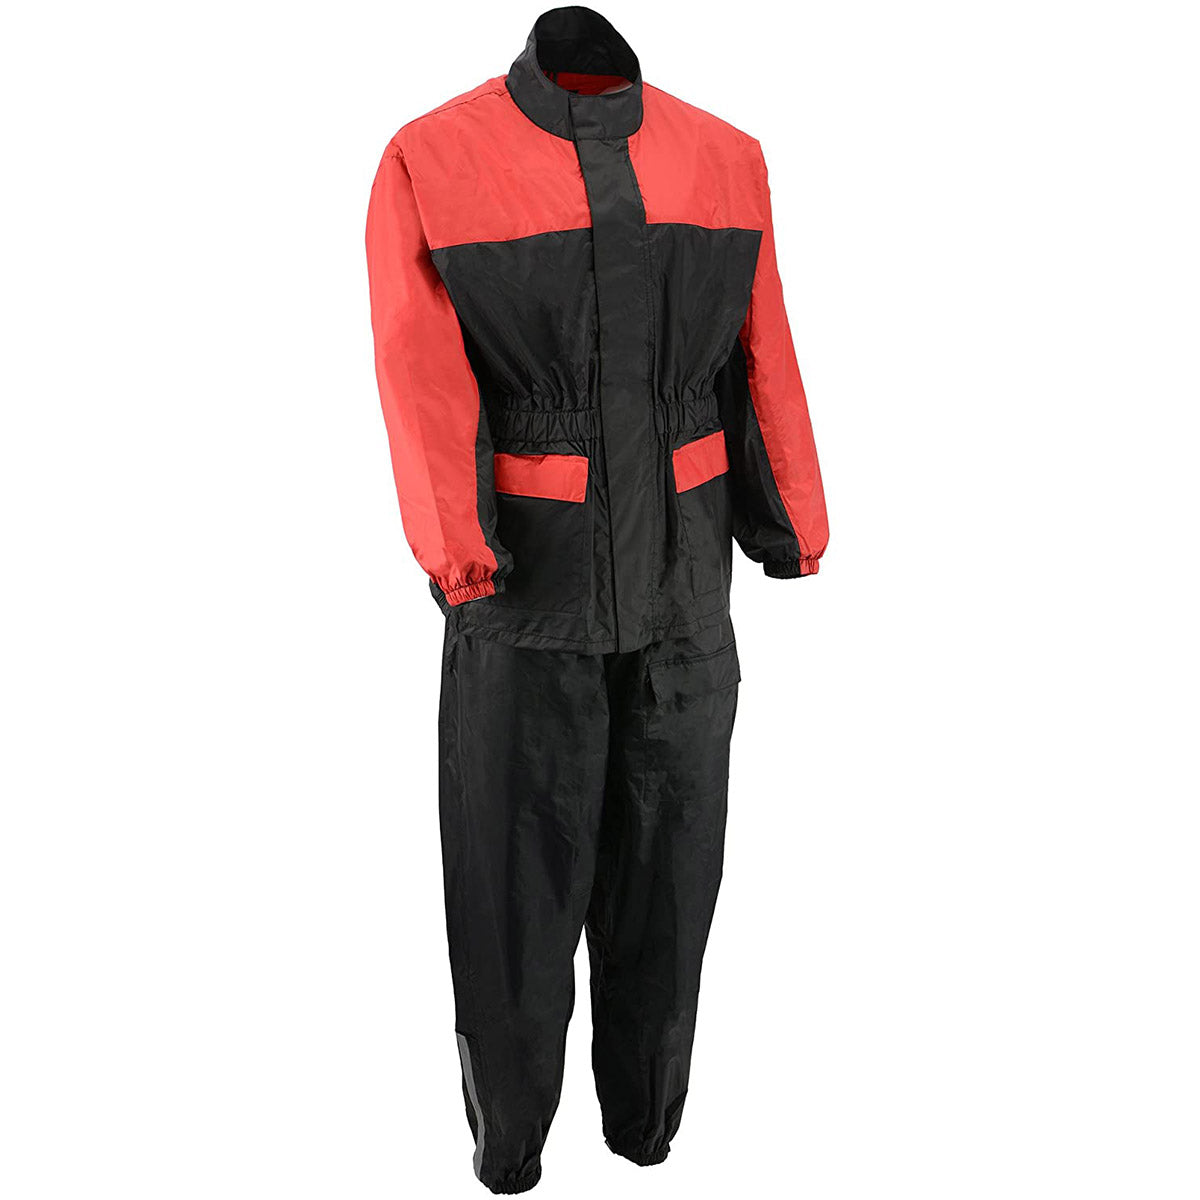 M-Boss Motorcycle Apparel BOS19500 Men’s Black and Red 2-Piece Motorcycle Rain Suit